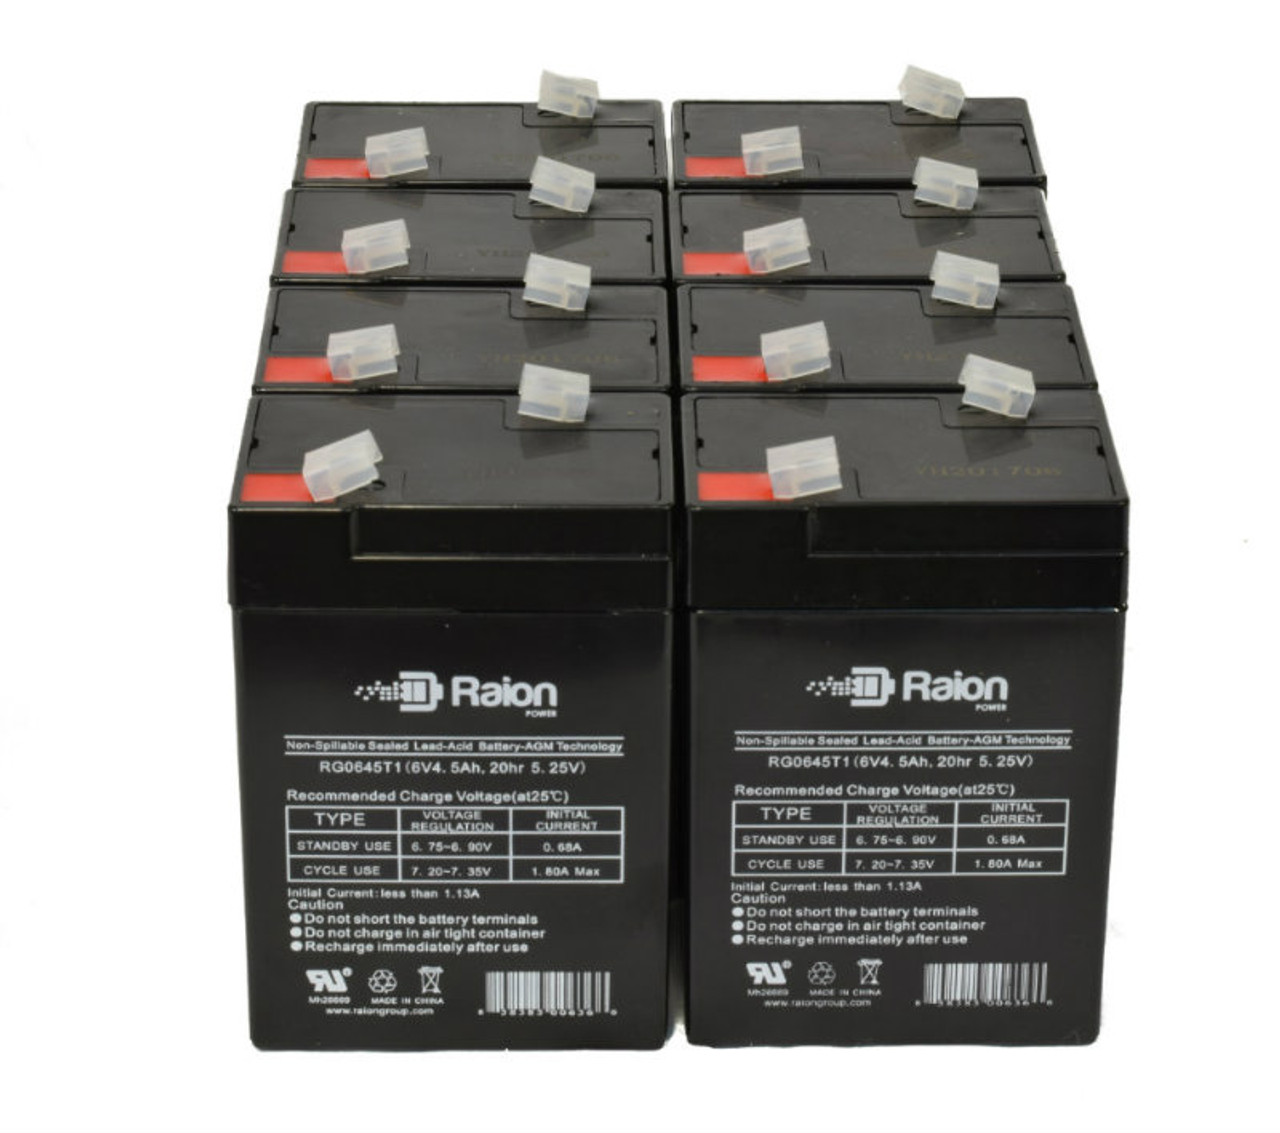 Raion Power 6V 4.5Ah Replacement Emergency Light Battery for Safety SN640 - 8 Pack